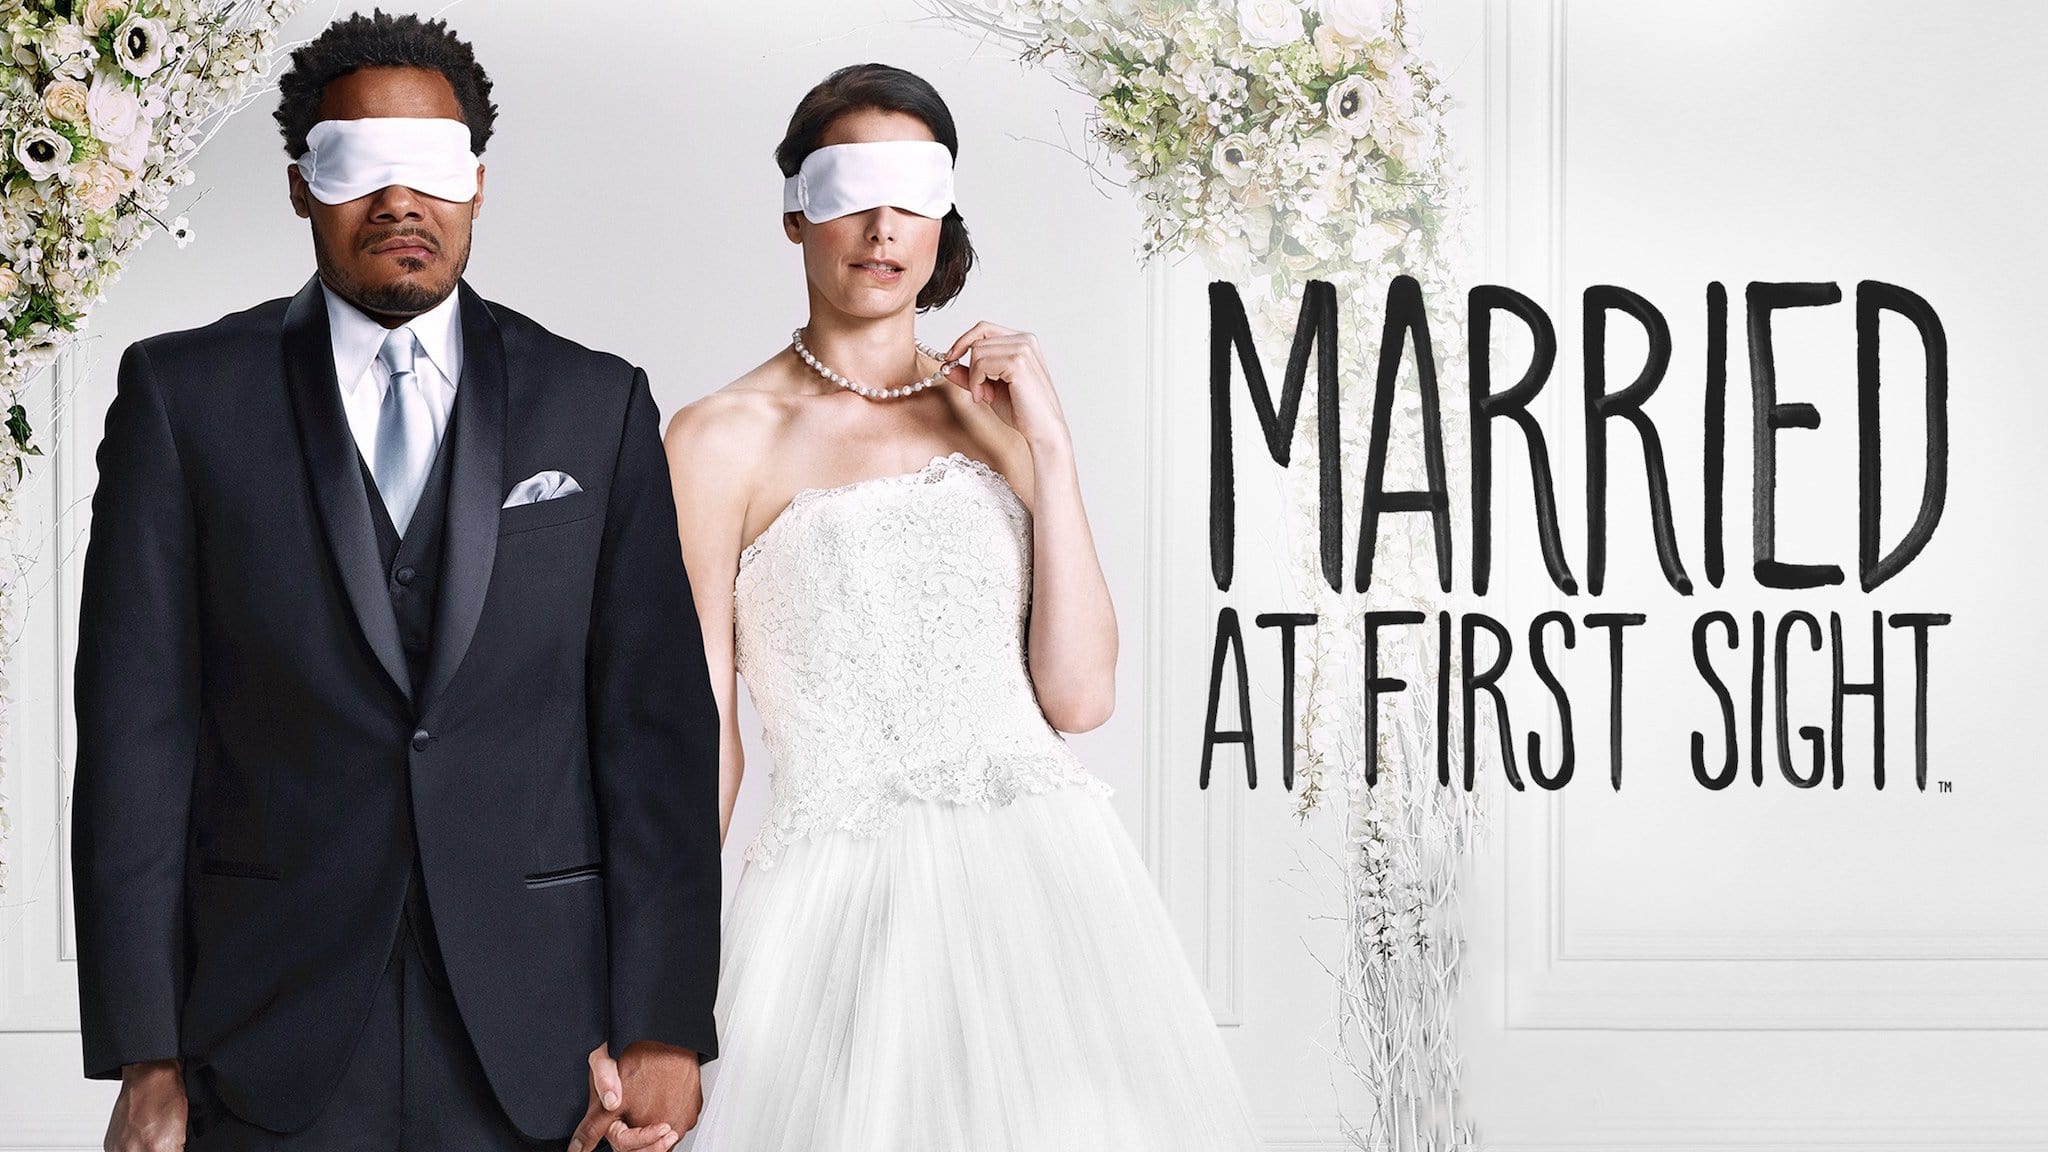 Married at First Sight UK - Season 7 Episode 1